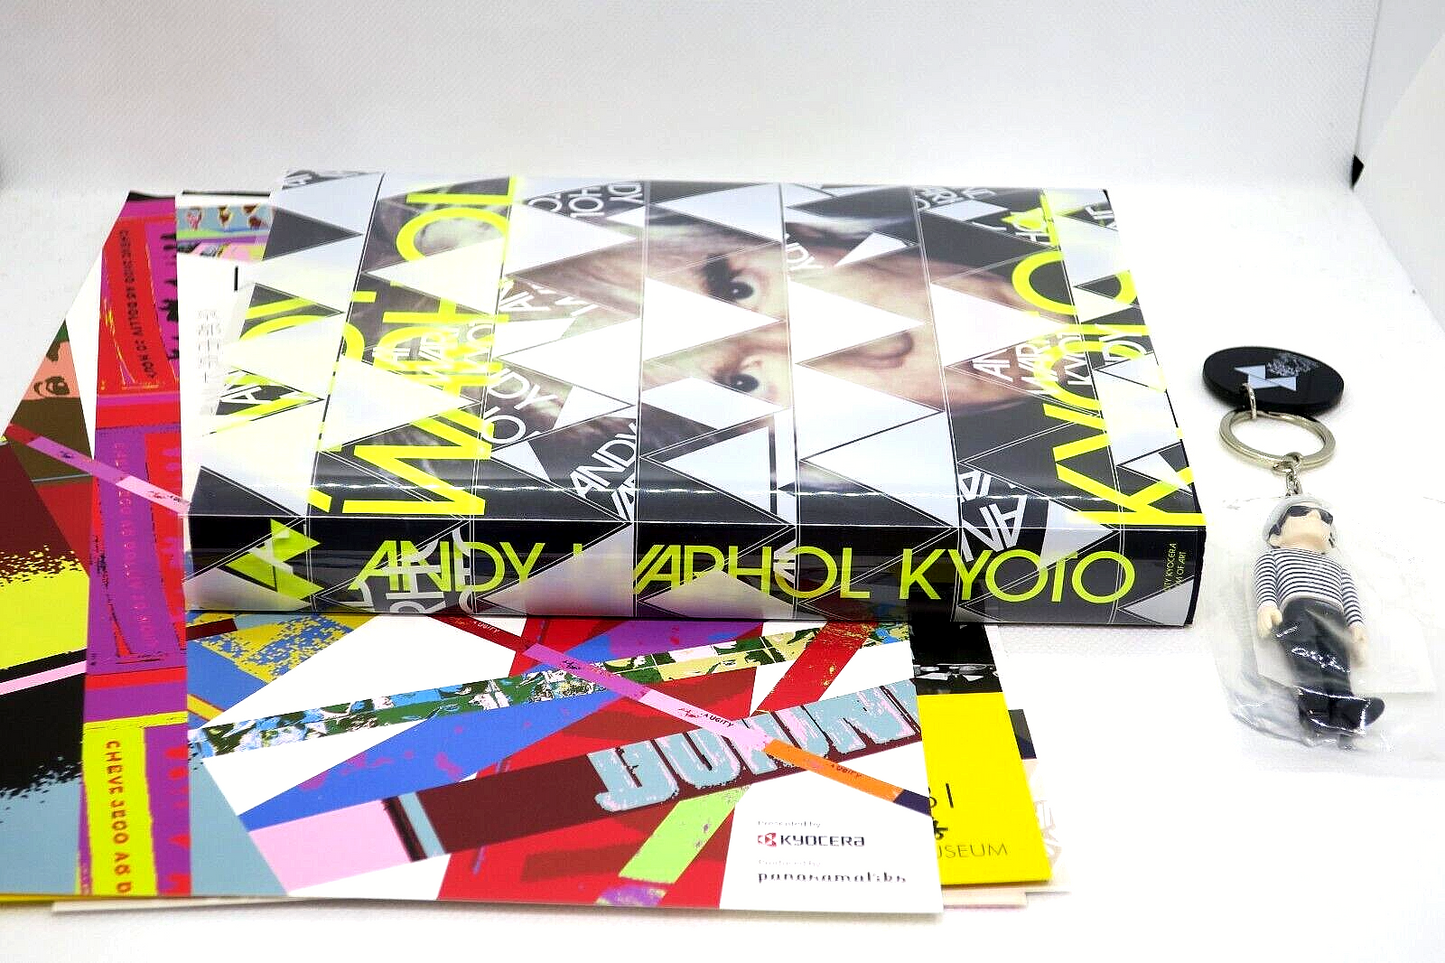 Rare ANDY WARHOL KYOTO Exhibition Official Book & Key Chain From Kyoto Japan